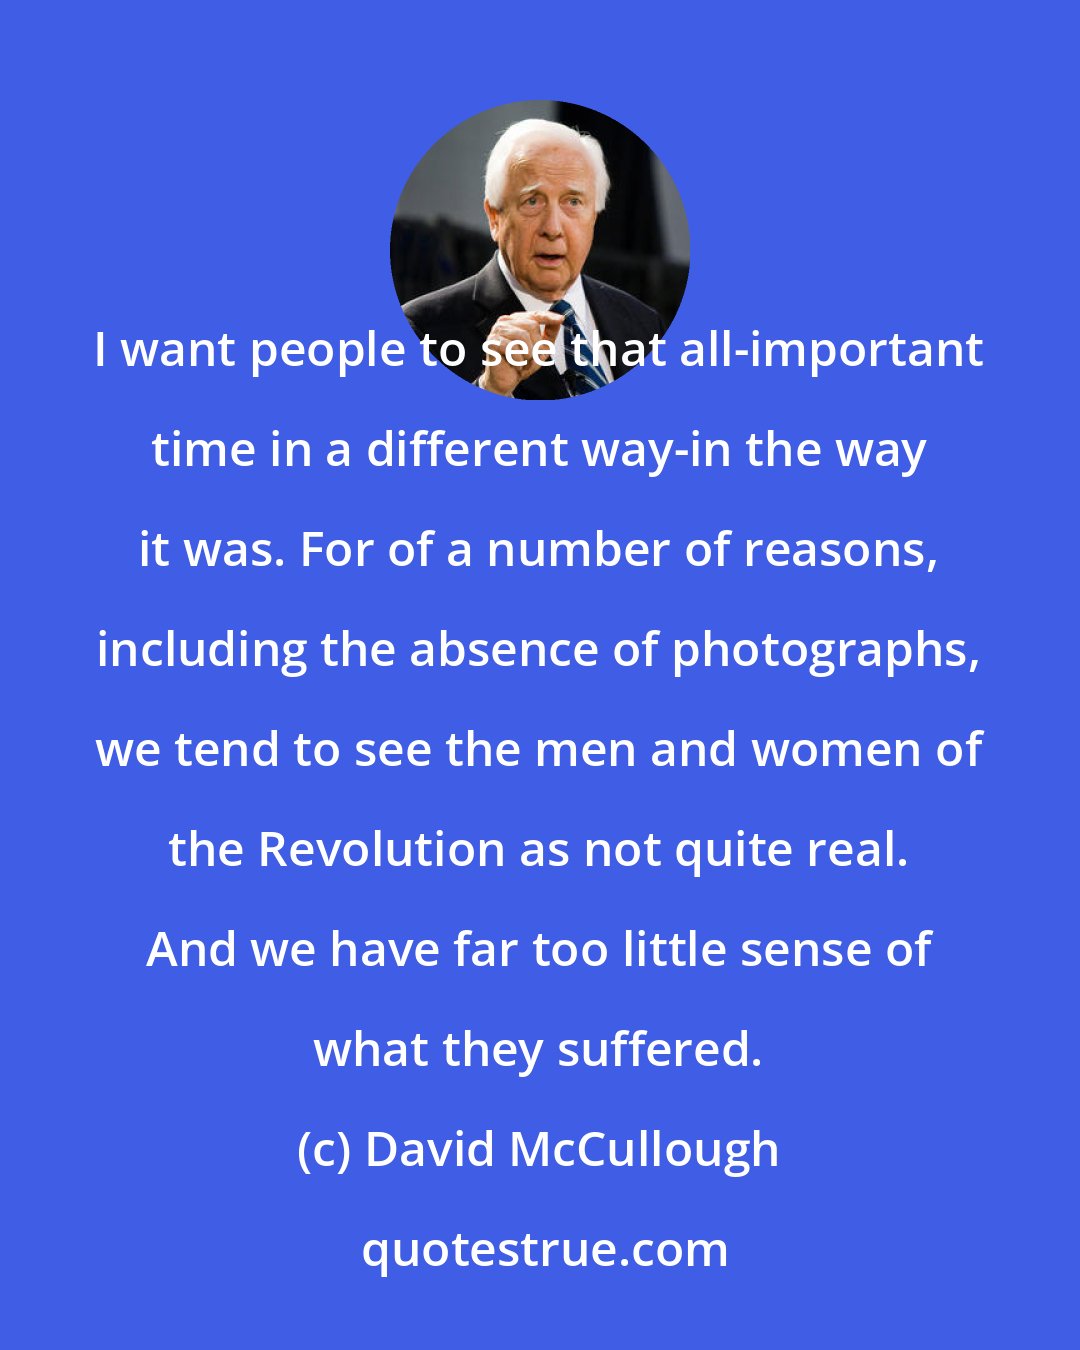 David McCullough: I want people to see that all-important time in a different way-in the way it was. For of a number of reasons, including the absence of photographs, we tend to see the men and women of the Revolution as not quite real. And we have far too little sense of what they suffered.